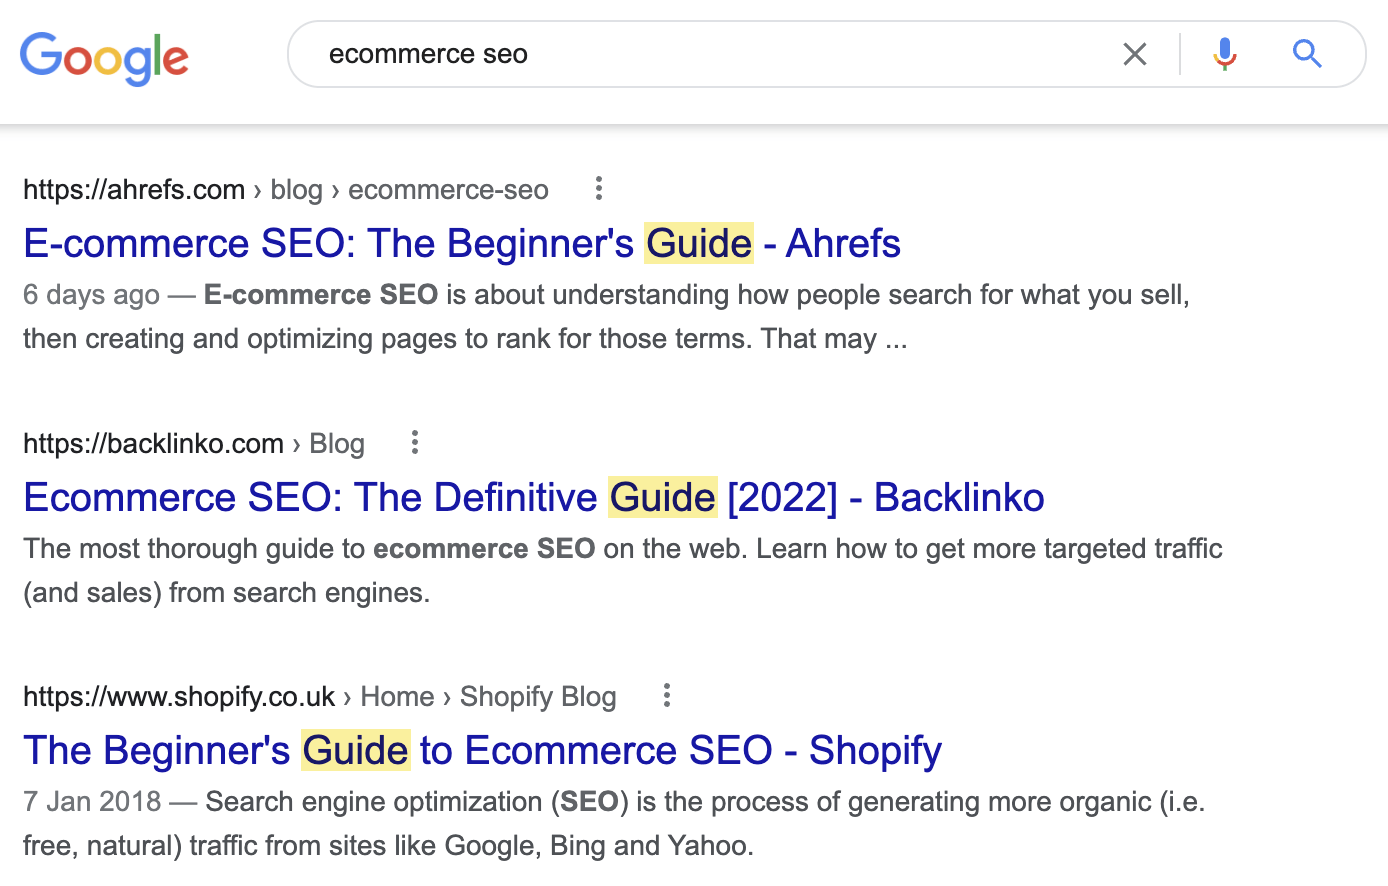 People searching for "ecommerce seo" want a guide
